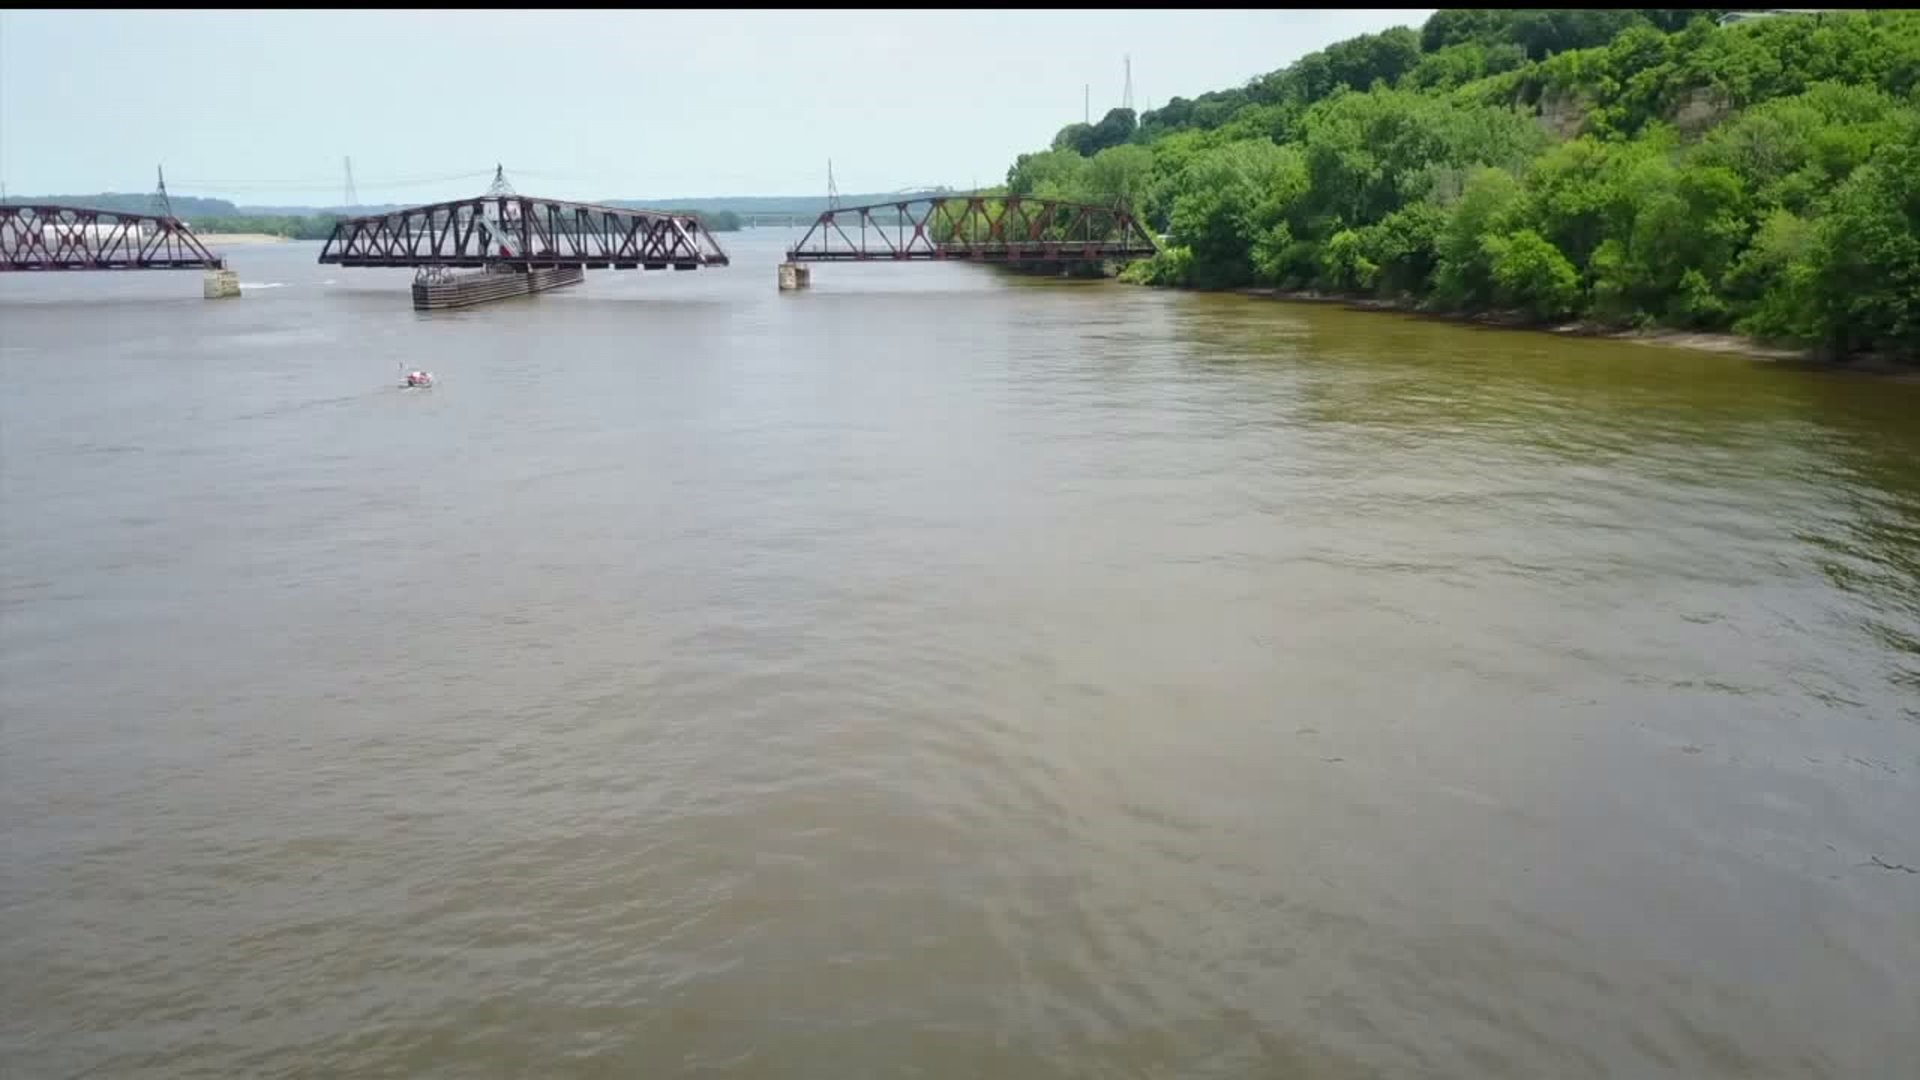 Crews continue searching for worker who fell into Mississippi River